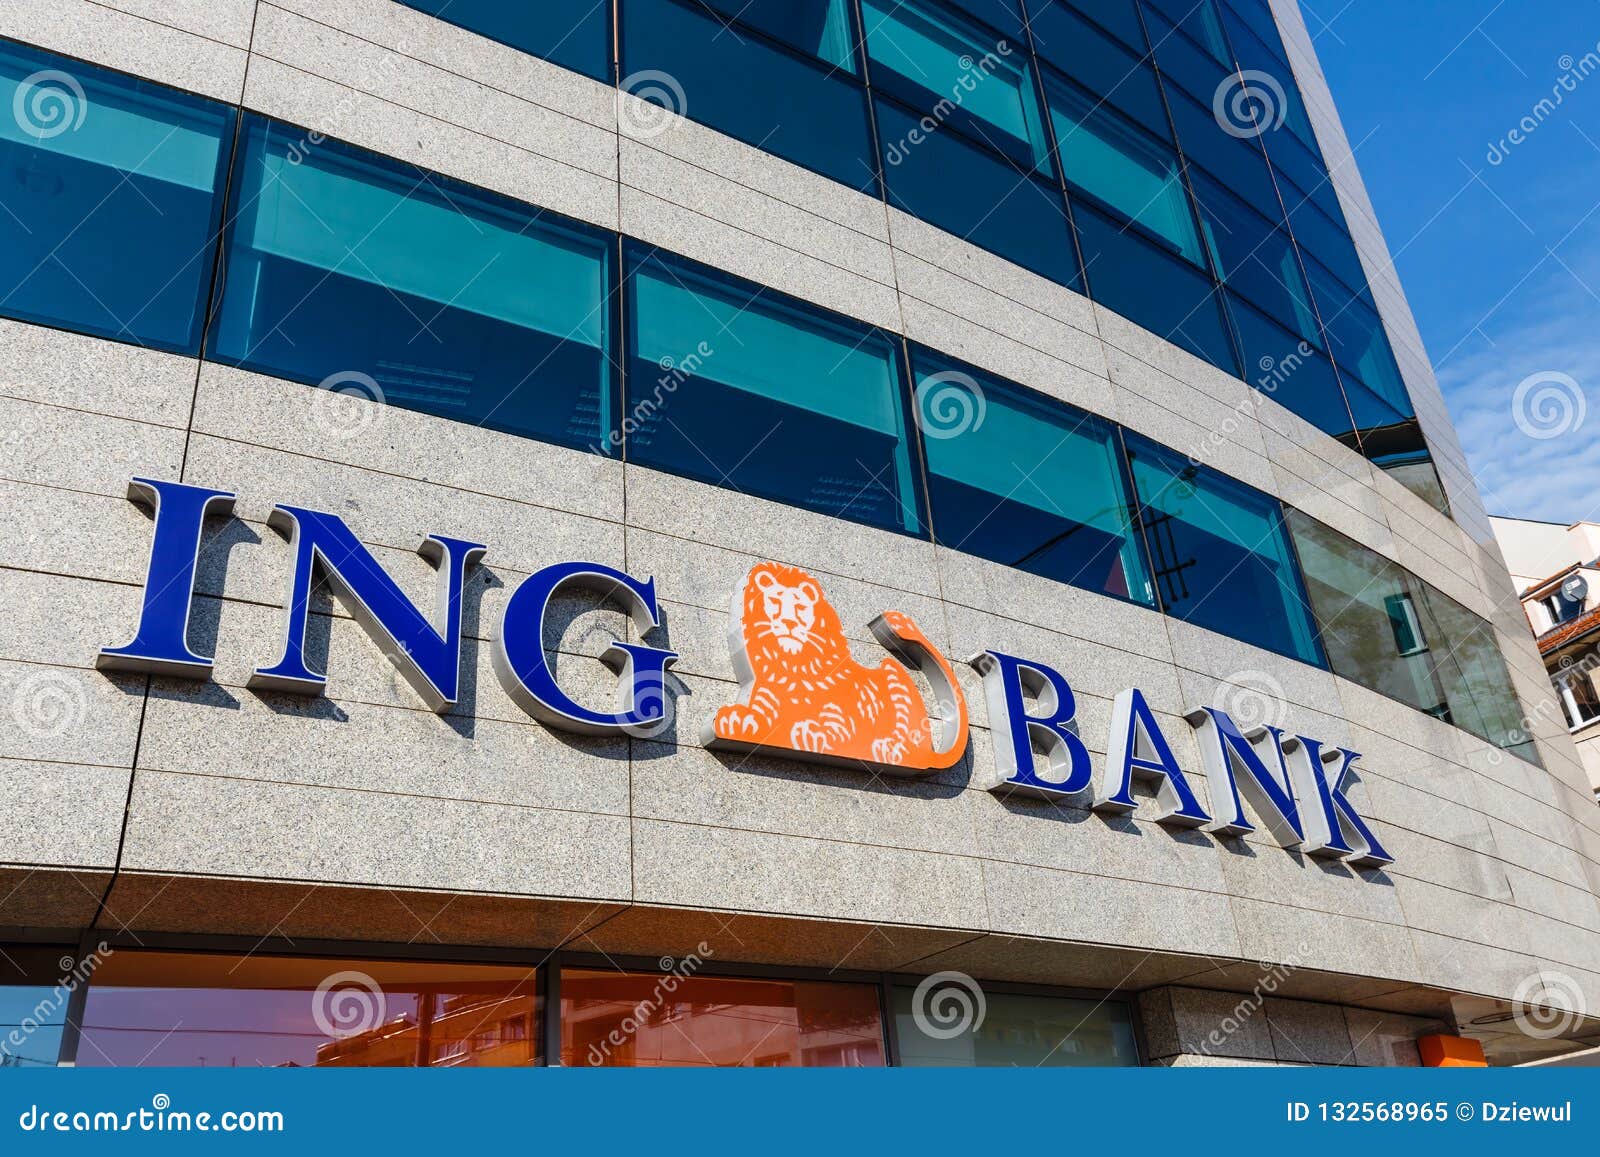 ing-bank-branch-entrance-ing-group-is-a-multinational-banking-company